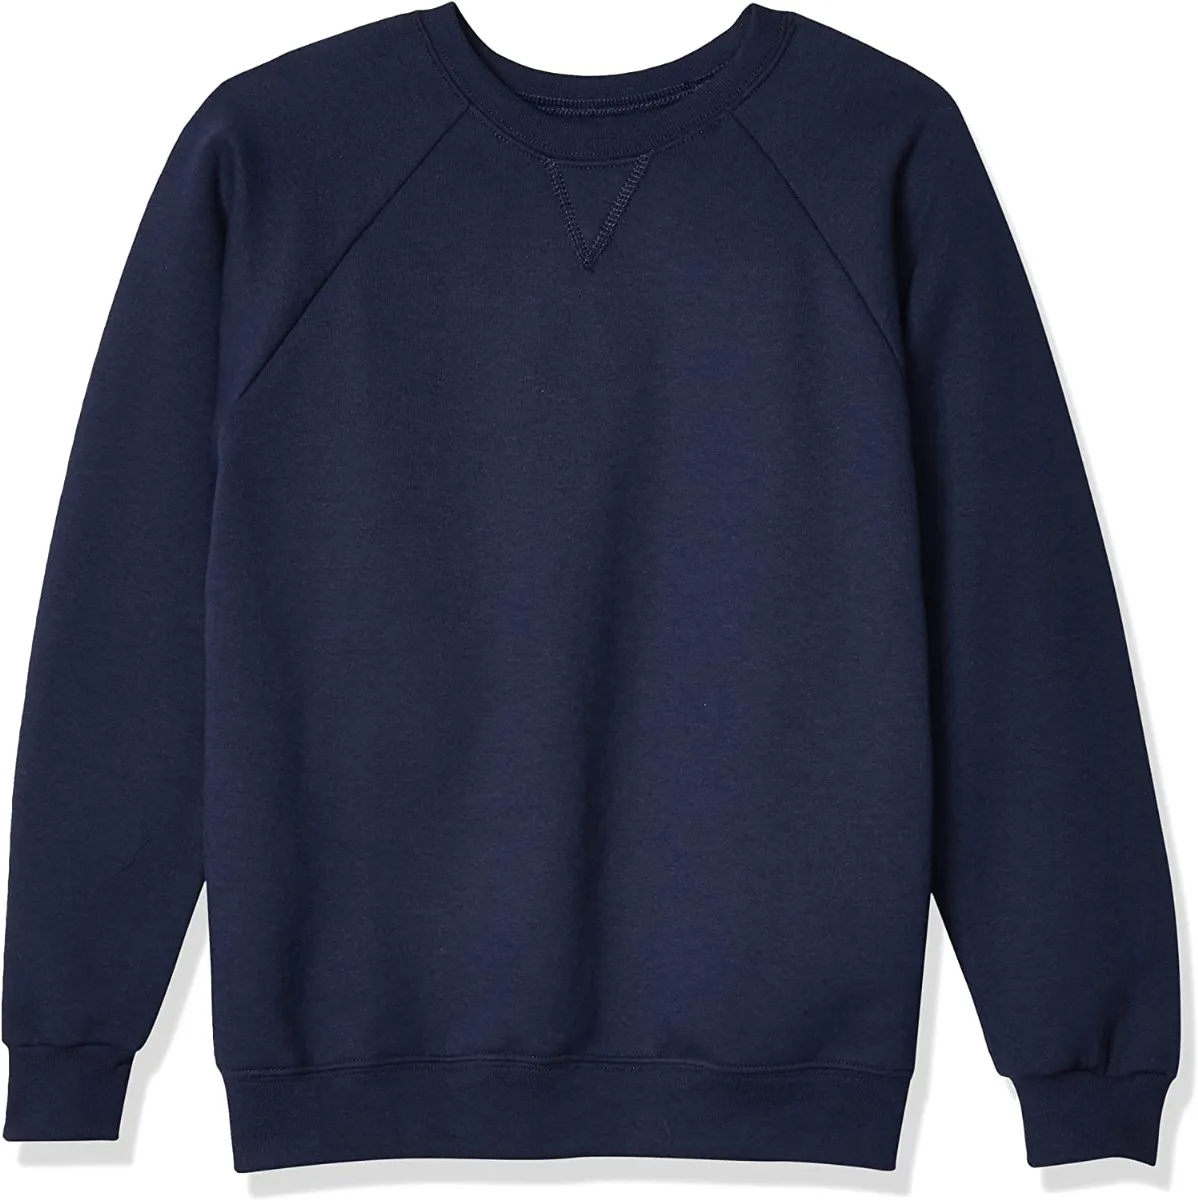 24 Pieces of Youth Crew Neck Sweatshirt Solid Navy - Size XX-Small